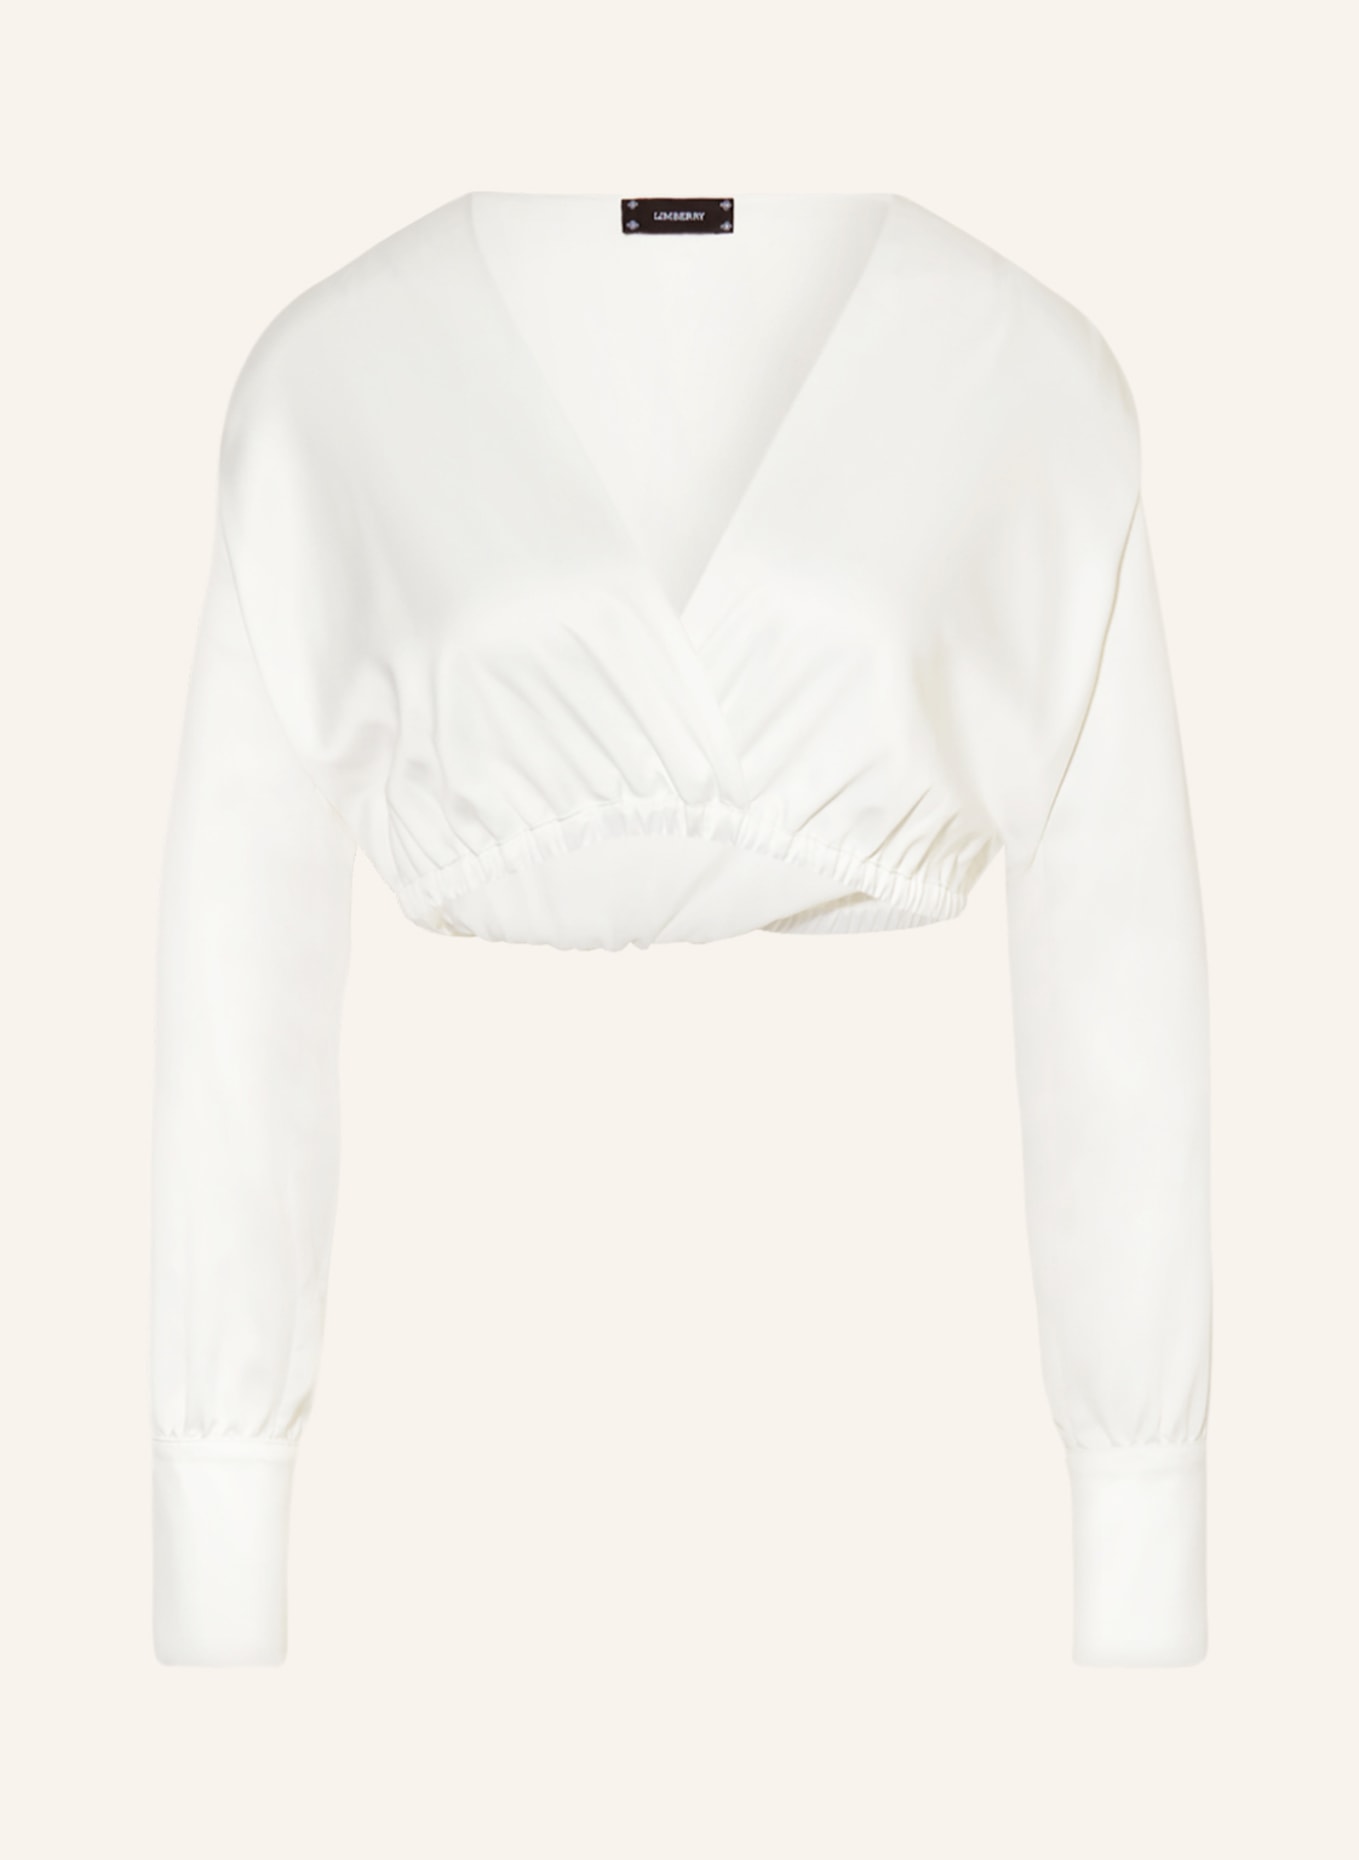 LIMBERRY Dirndl blouse made of satin, Color: WHITE (Image 1)